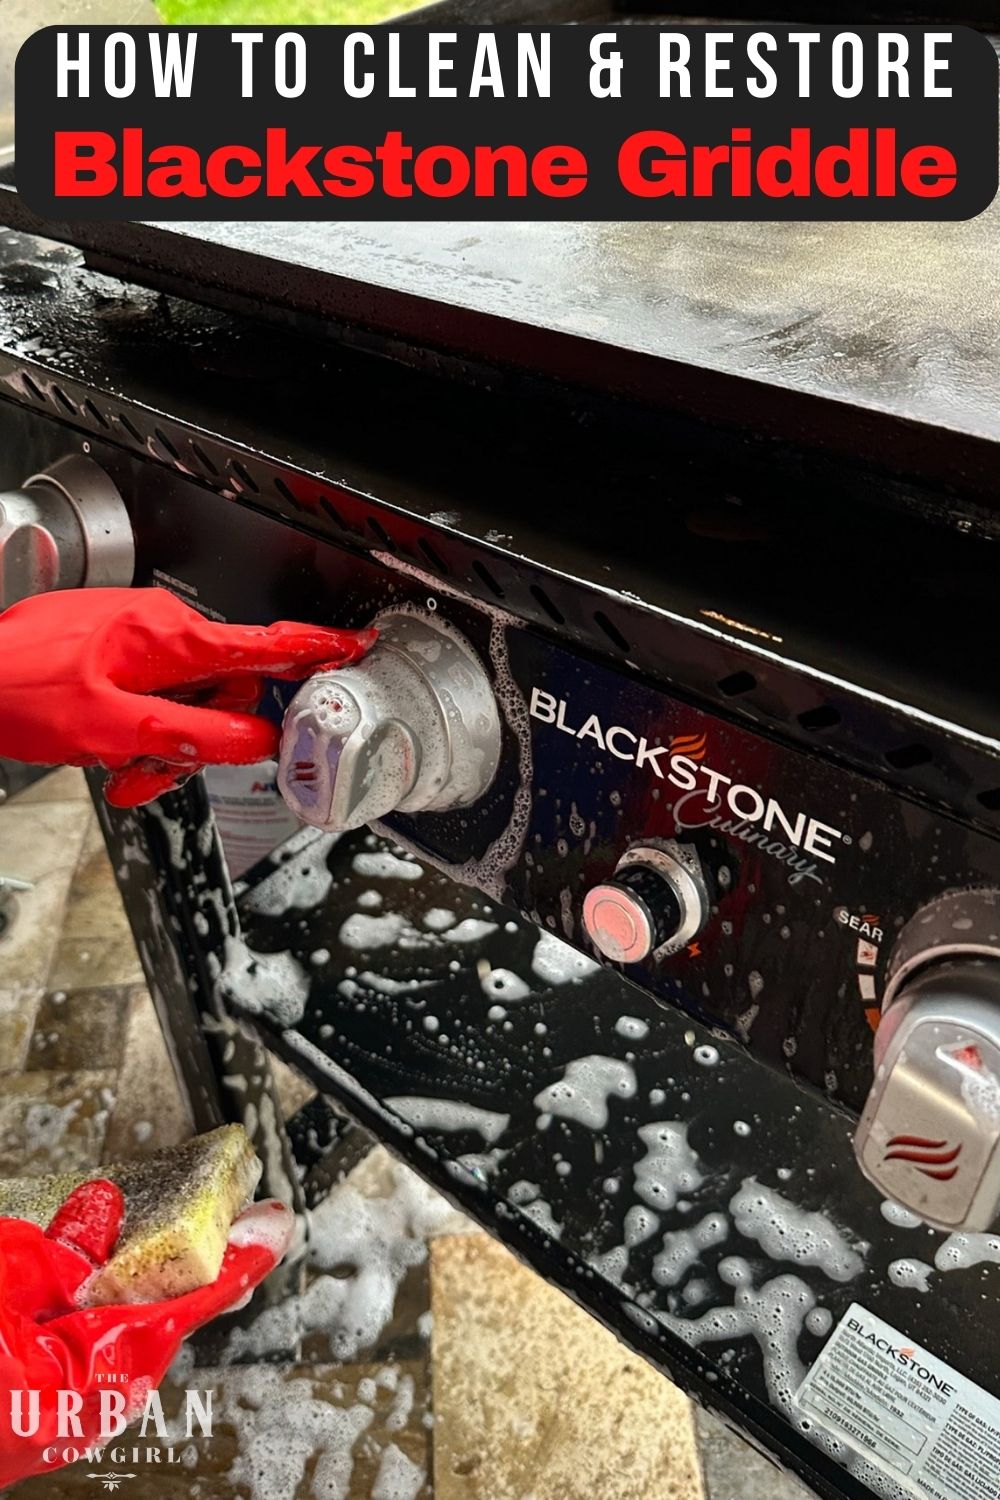 Blackstone Griddle being cleaned with soapy water.